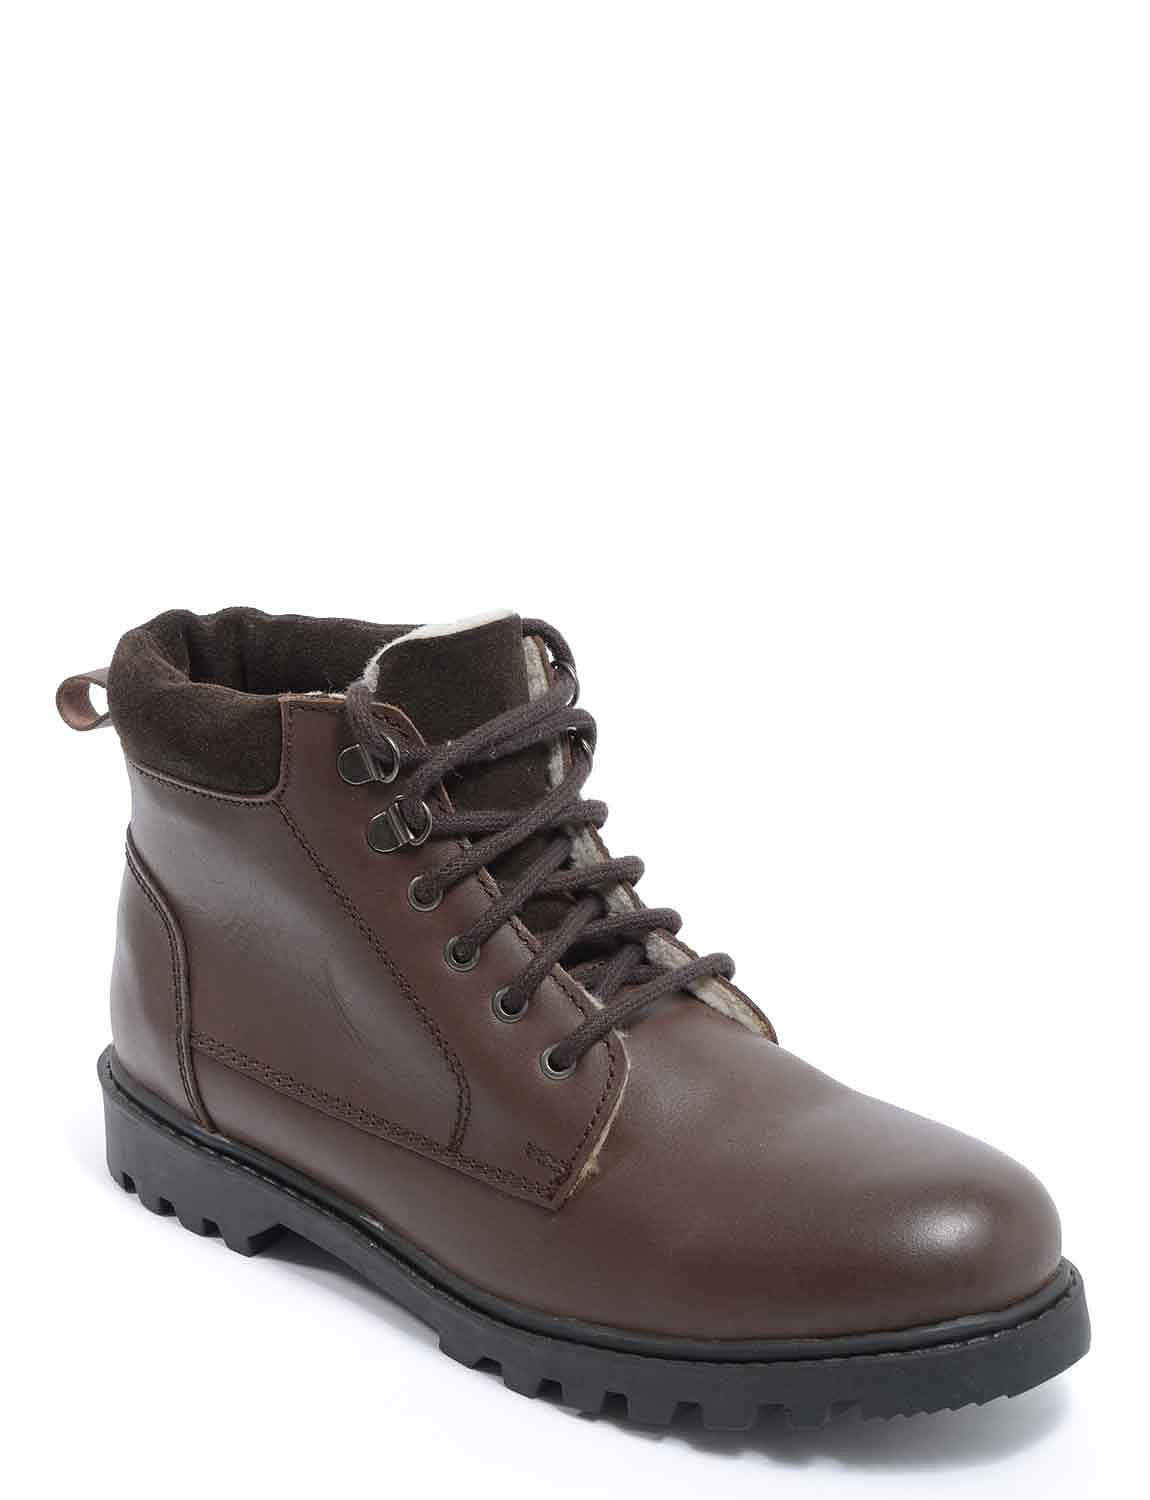 fleece lined leather boots